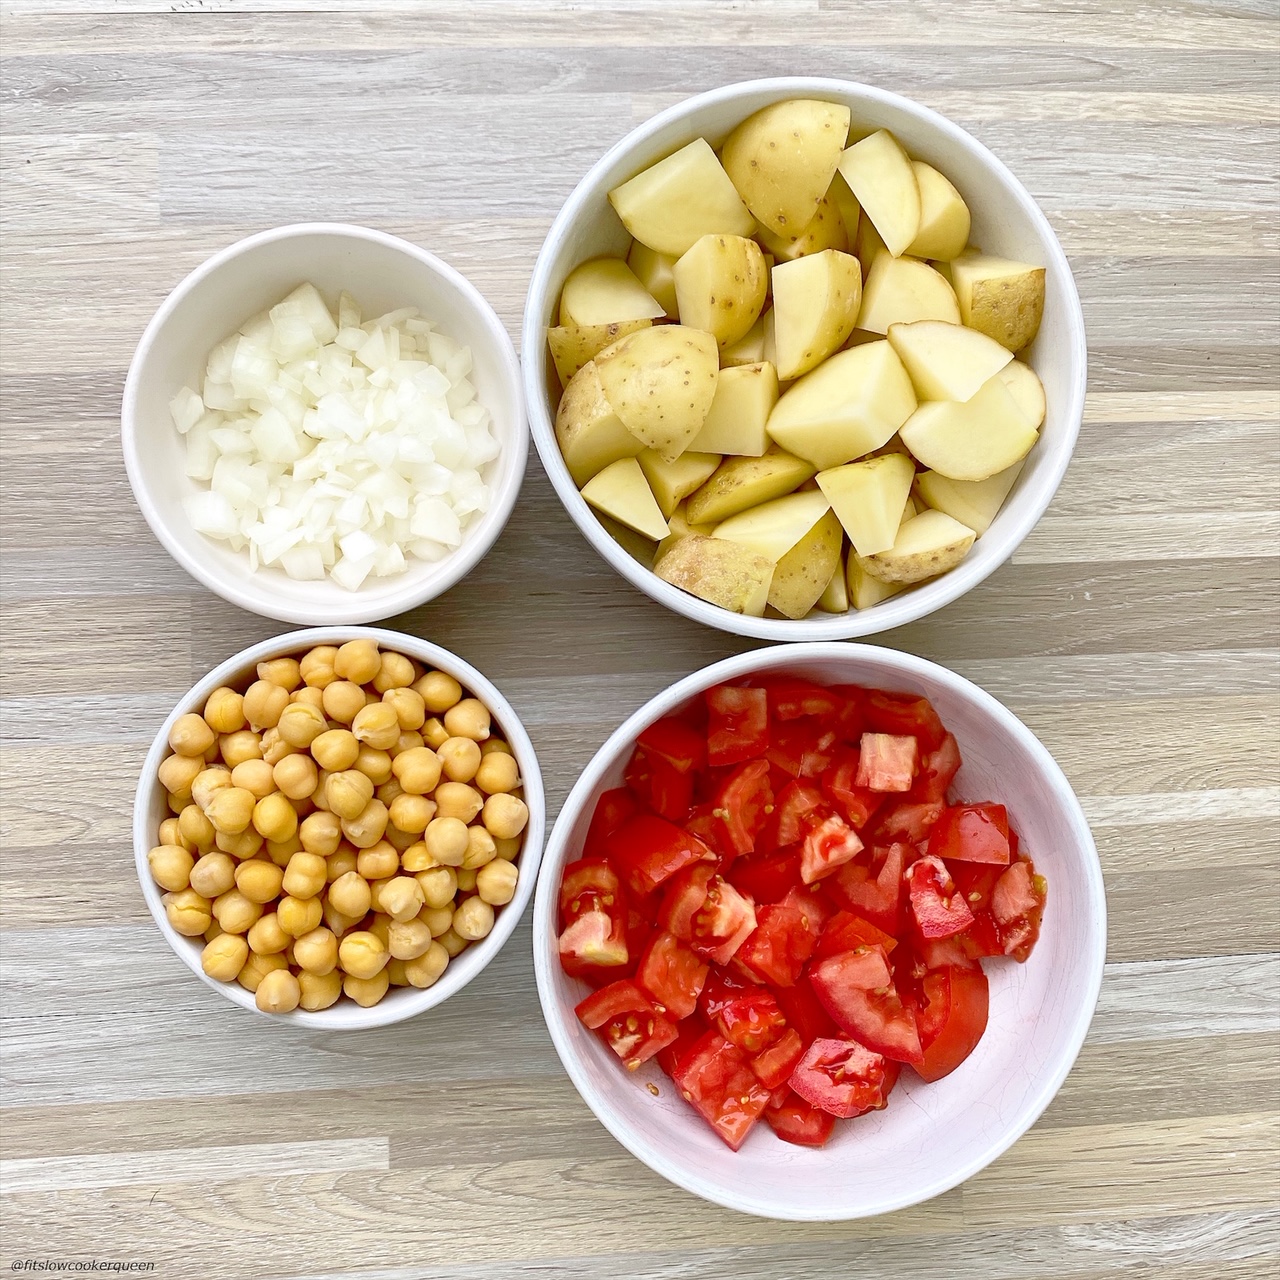 in separate white bowls: diced roma tomatoes, chickpeas, diced yellow potatoes, diced onion